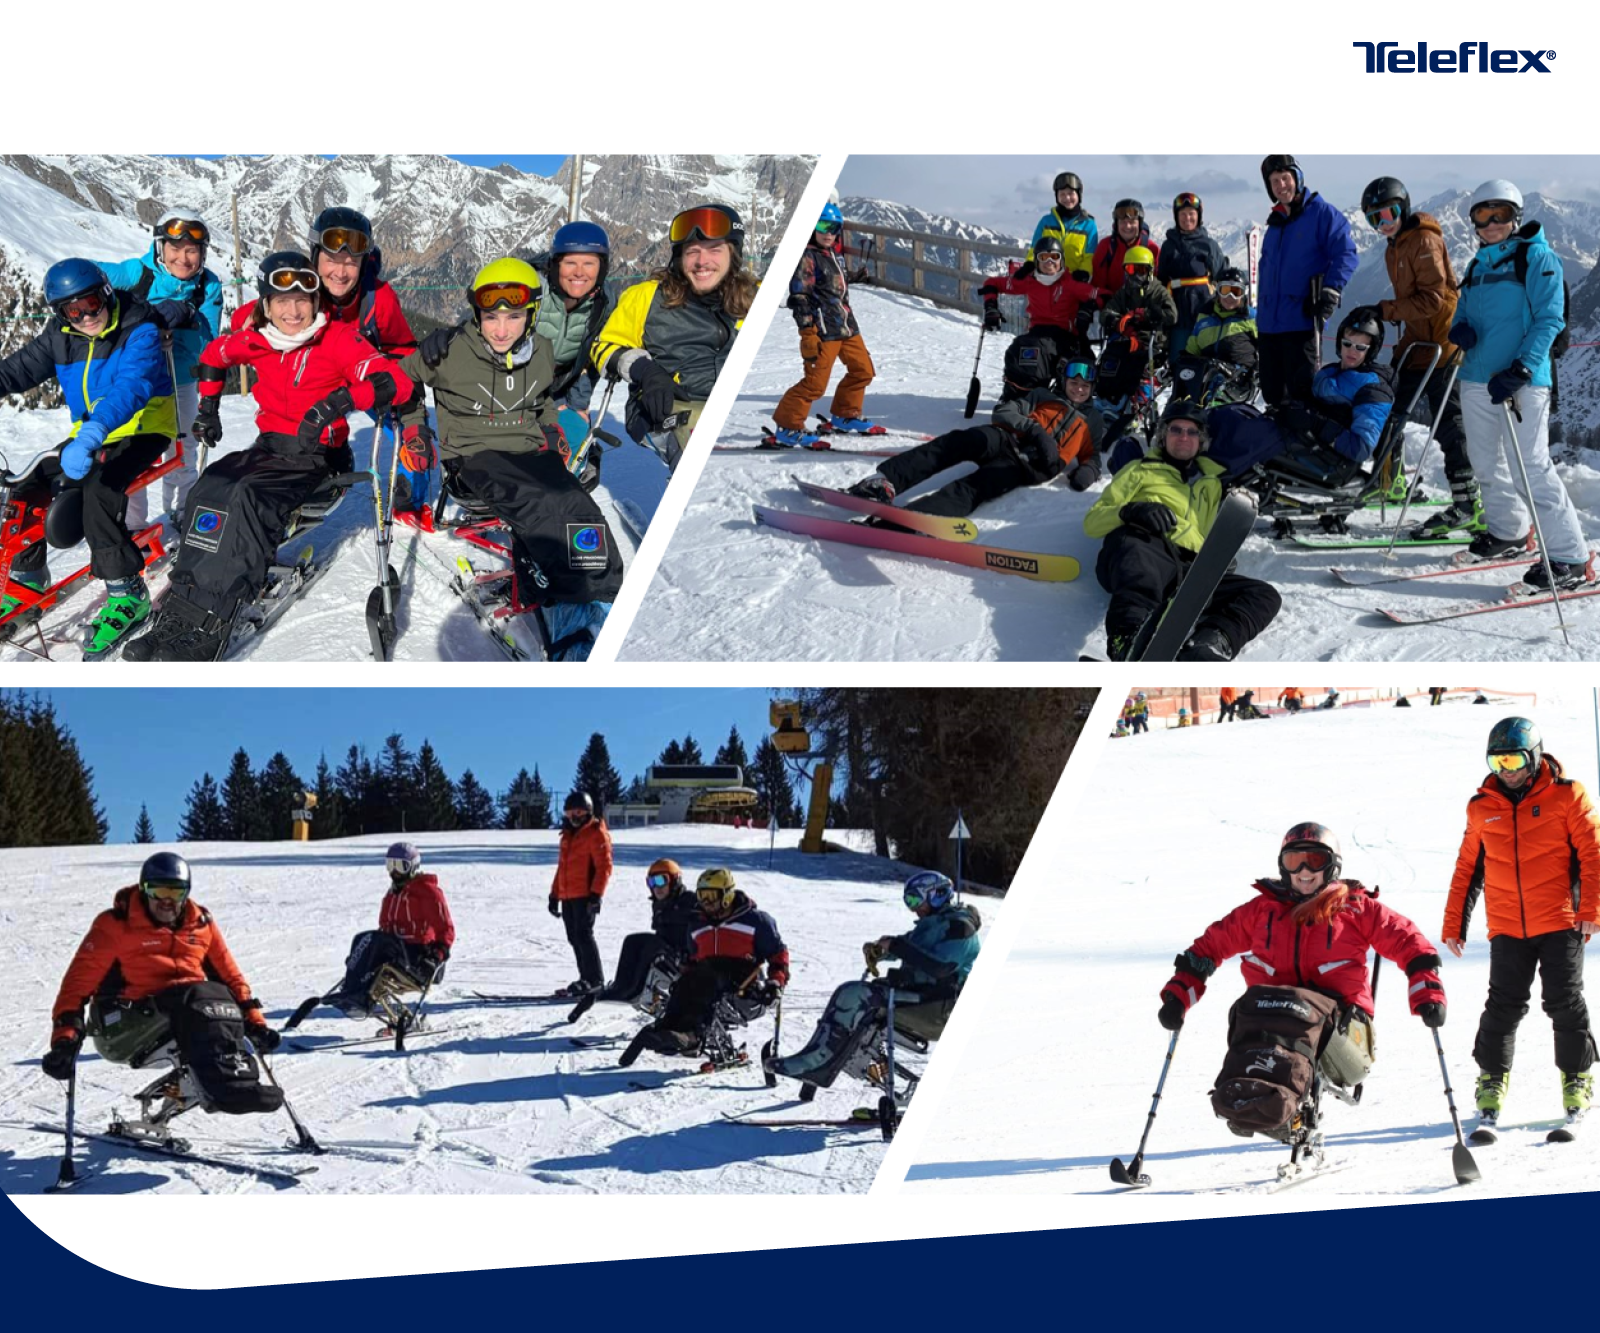 Review of the Teleflex Urology Care events in the 2022-2023 ski season